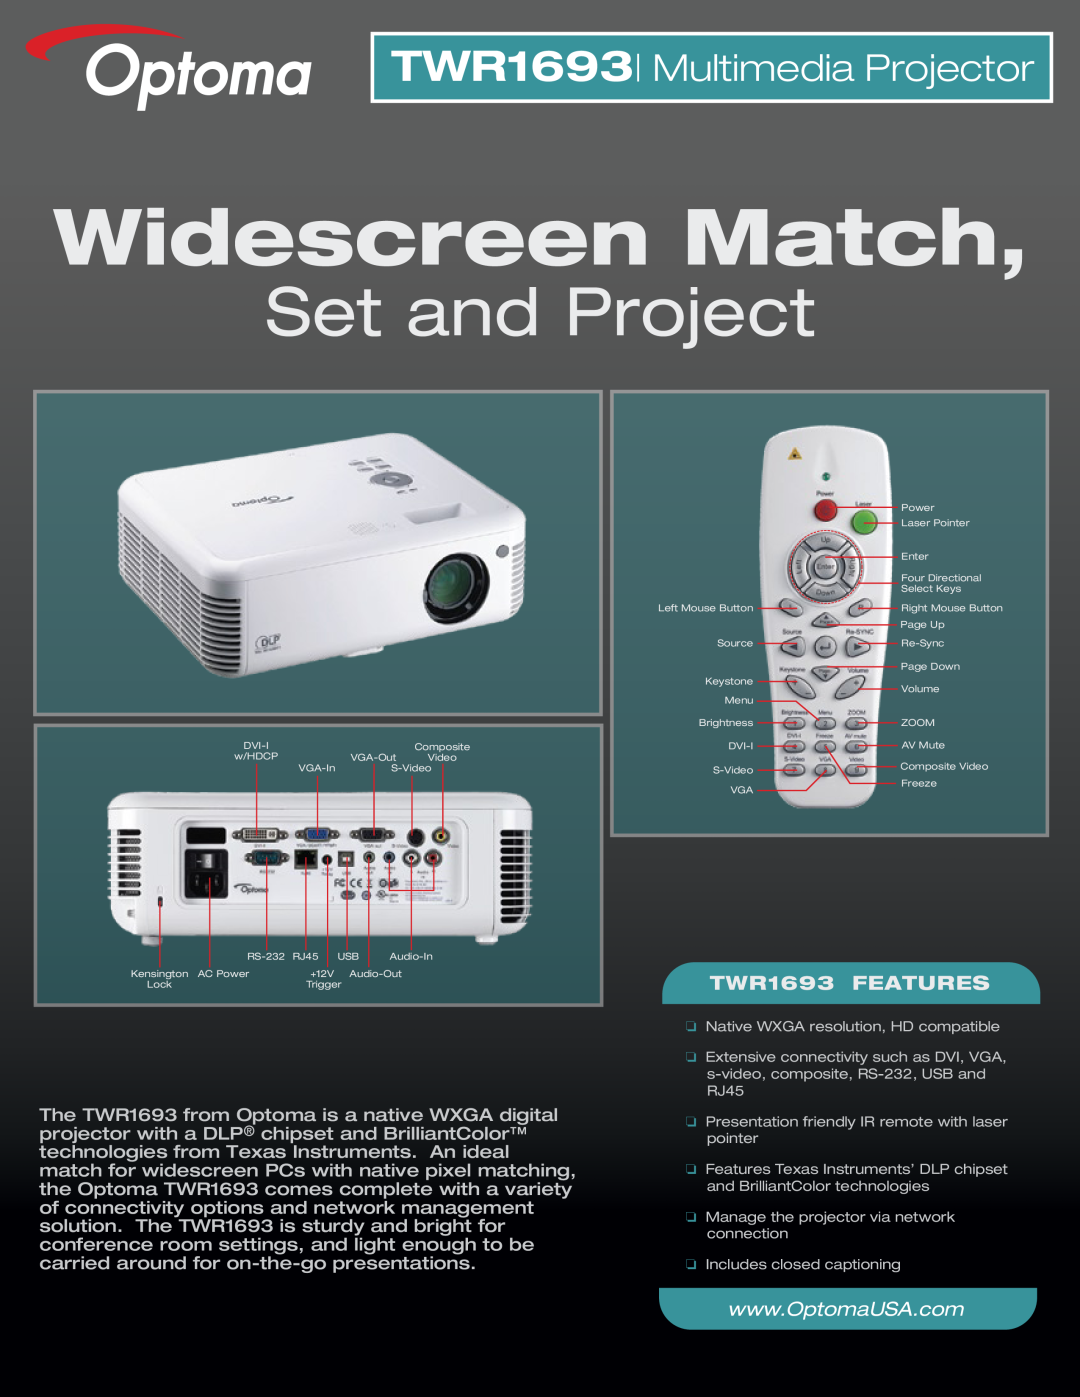 Optoma Technology manual TWR1693 Multimedia Projector, Widescreen Match, Set and Project, TWR1693 FEATURES 